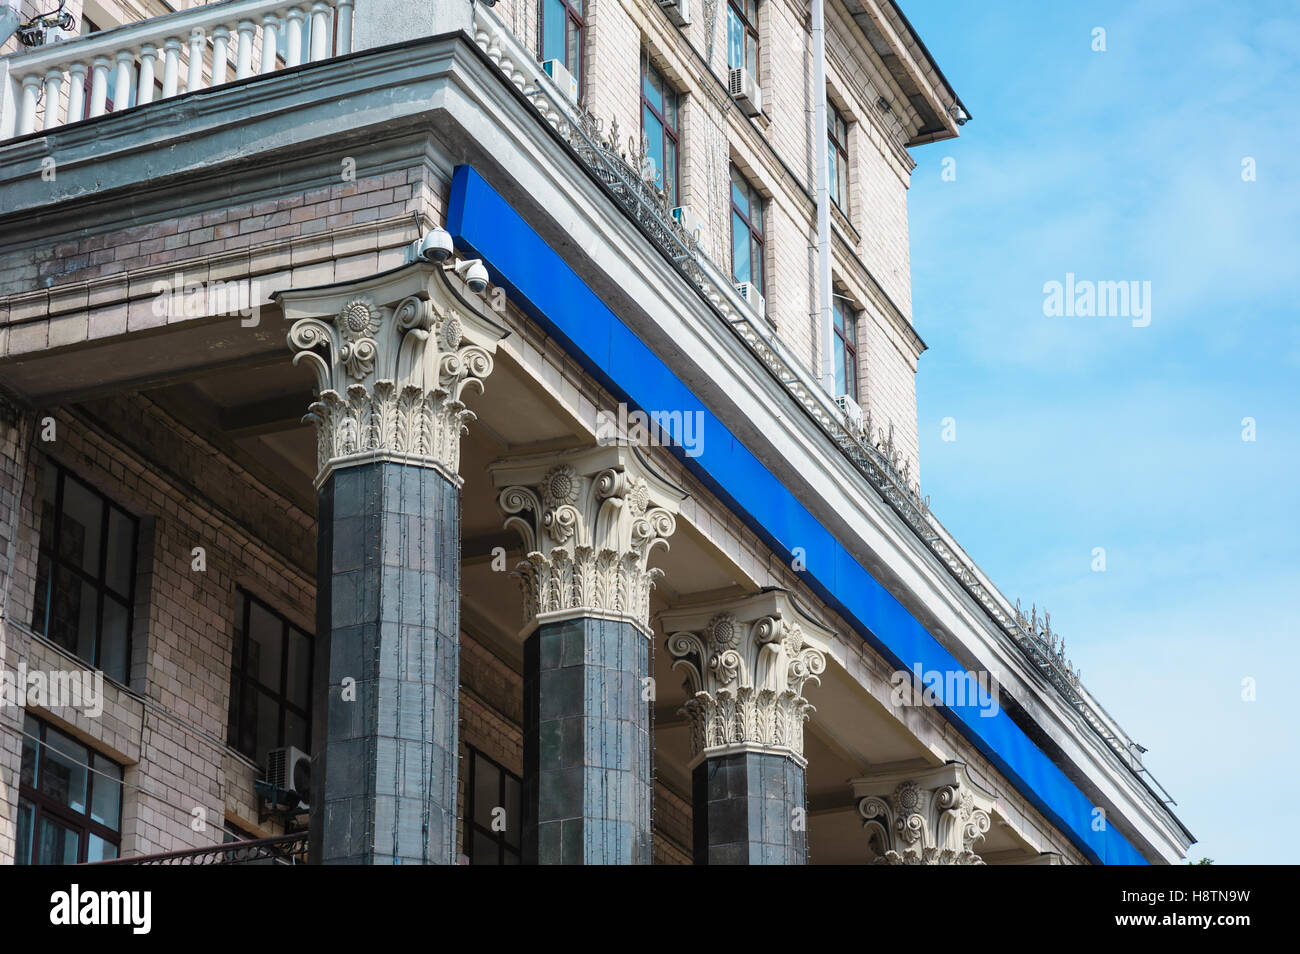 Beautiful architectural columns on the facade of the building Stock Photo